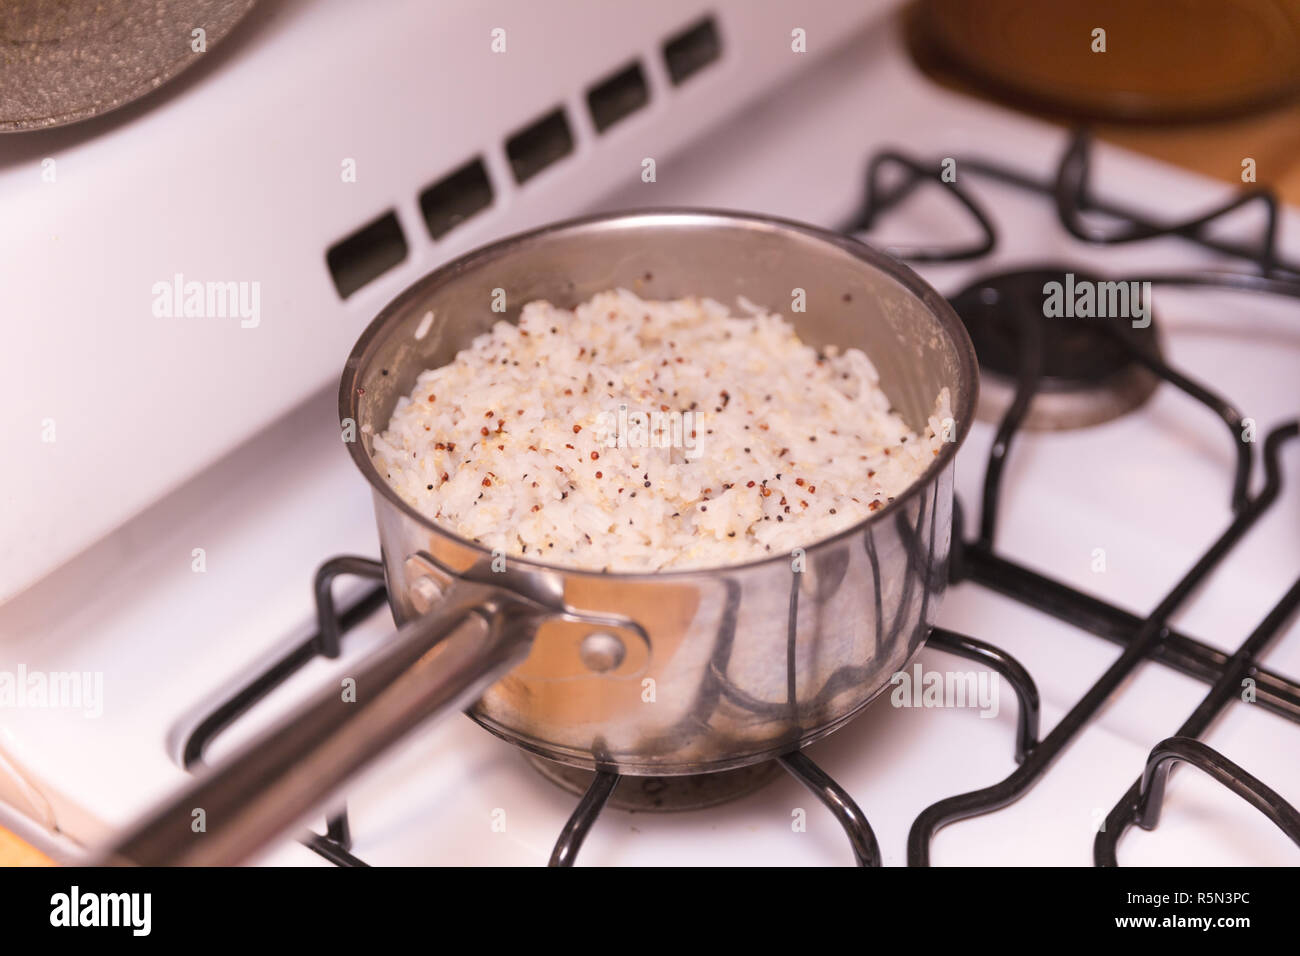 Pot Of Rice Cooking On Gas Stovetop Or Burner Rice Is Seasoned Stock Photo Alamy